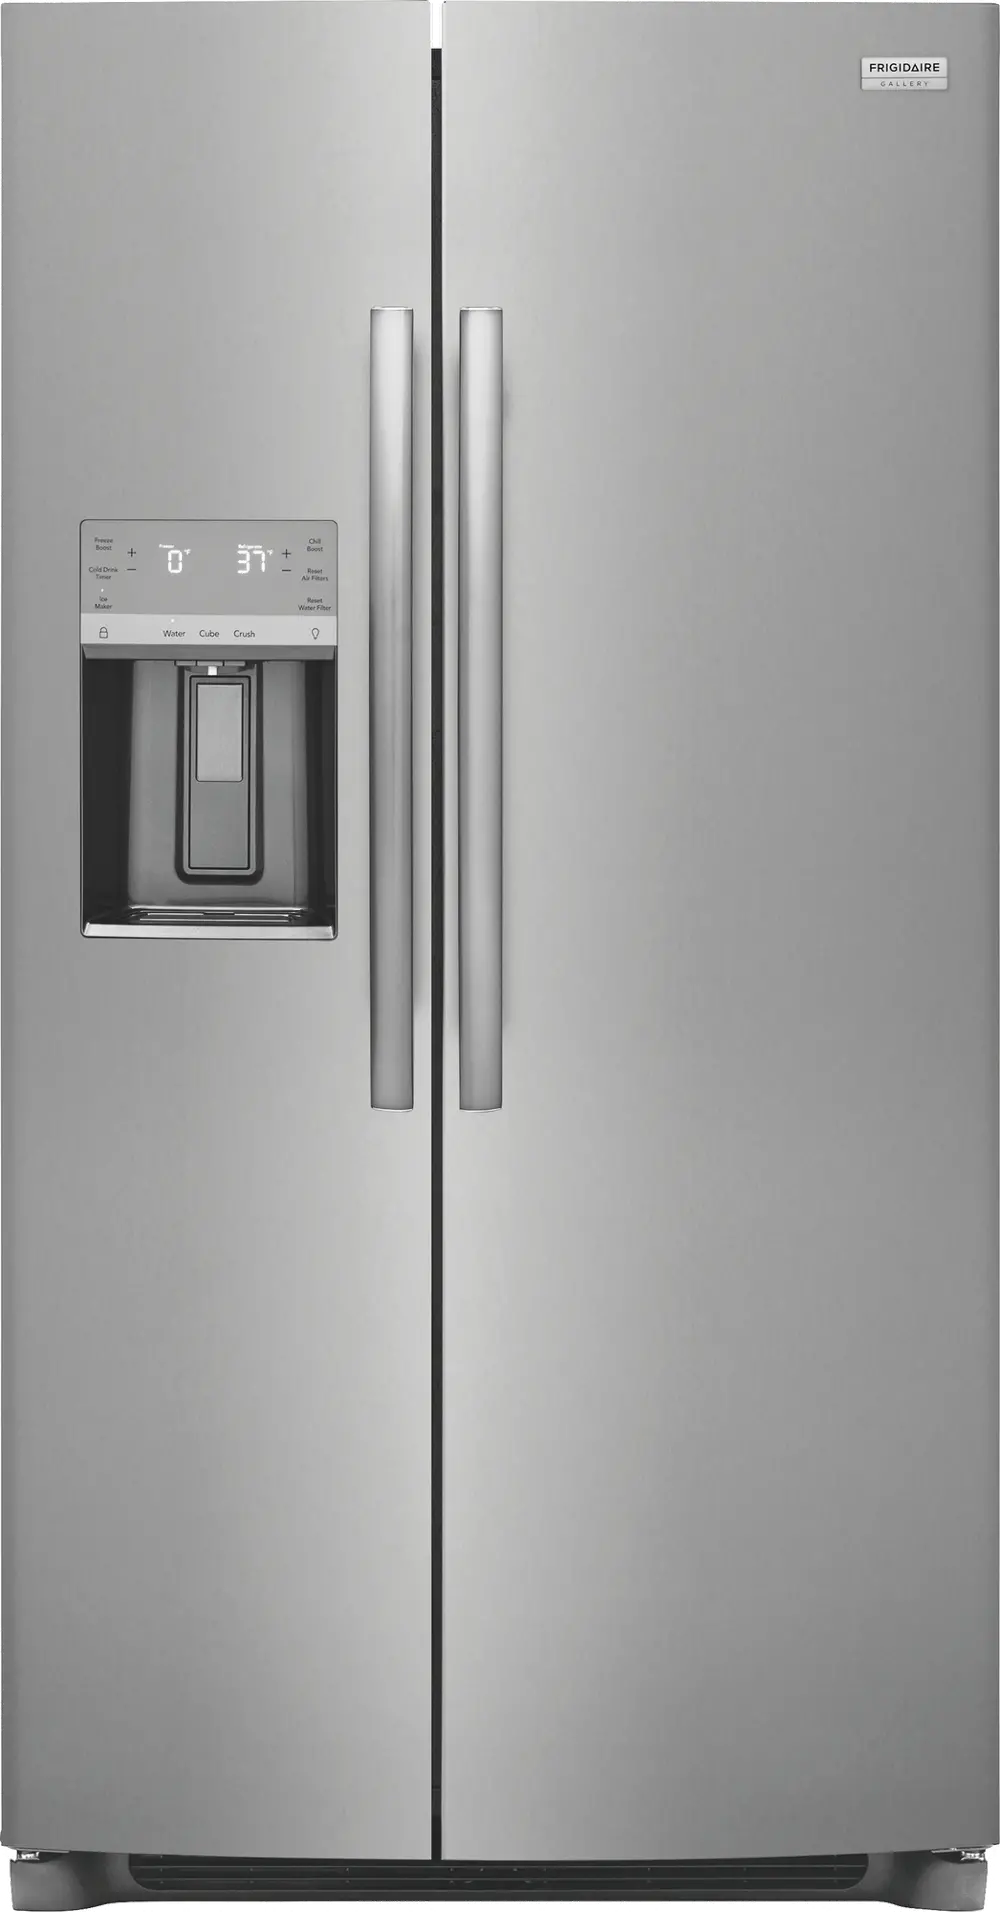 GRSC2352AF Frigidaire Gallery 22.3 cu ft Side by Side Refrigerator -  Counter Depth Stainless Steel-1